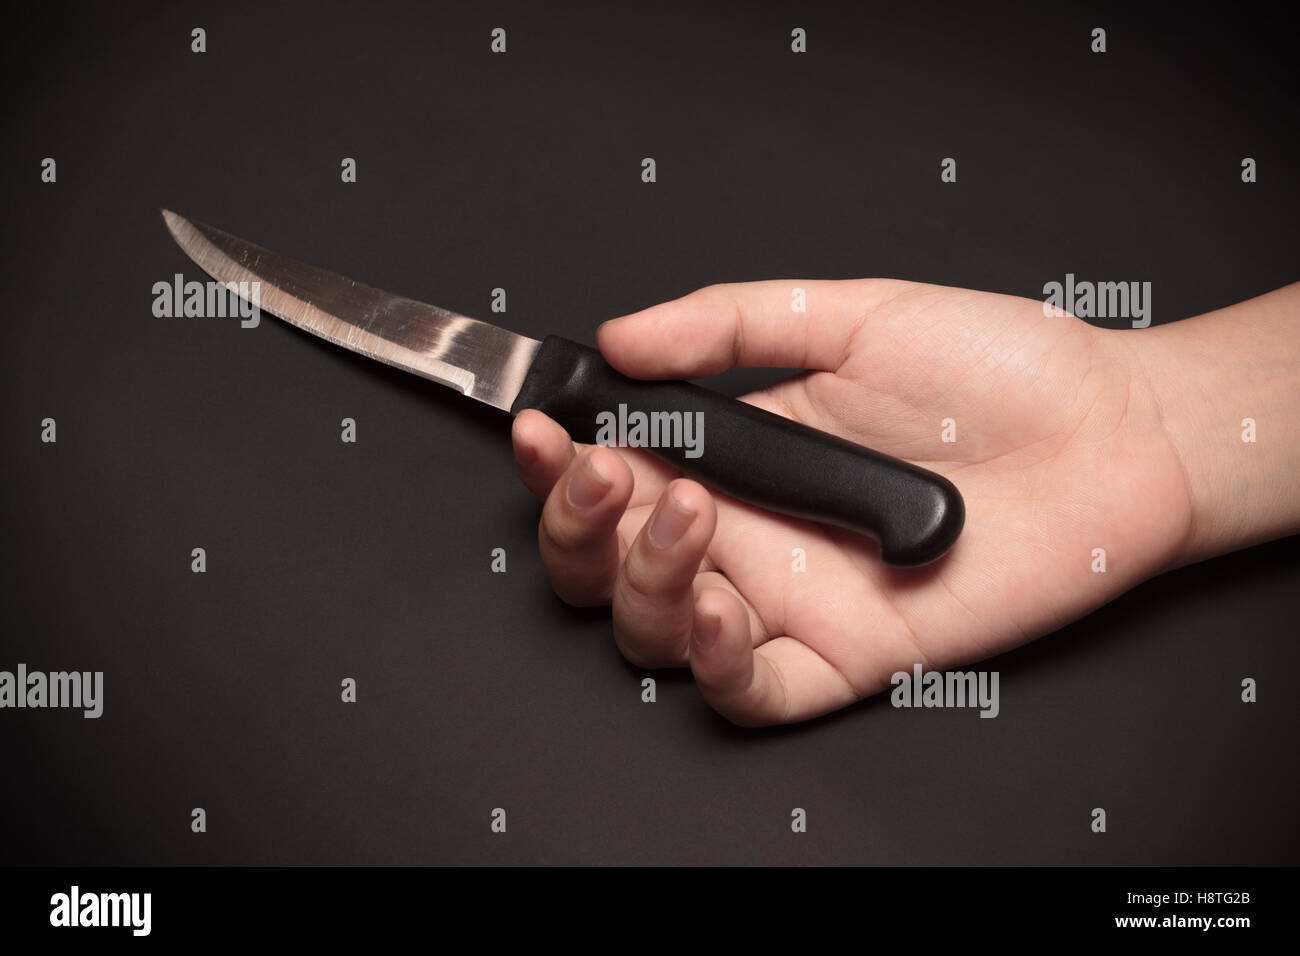 A sharp kitchen knife on somebody's hand. This image was shot with single flash light bouncing technique. Stock Photo